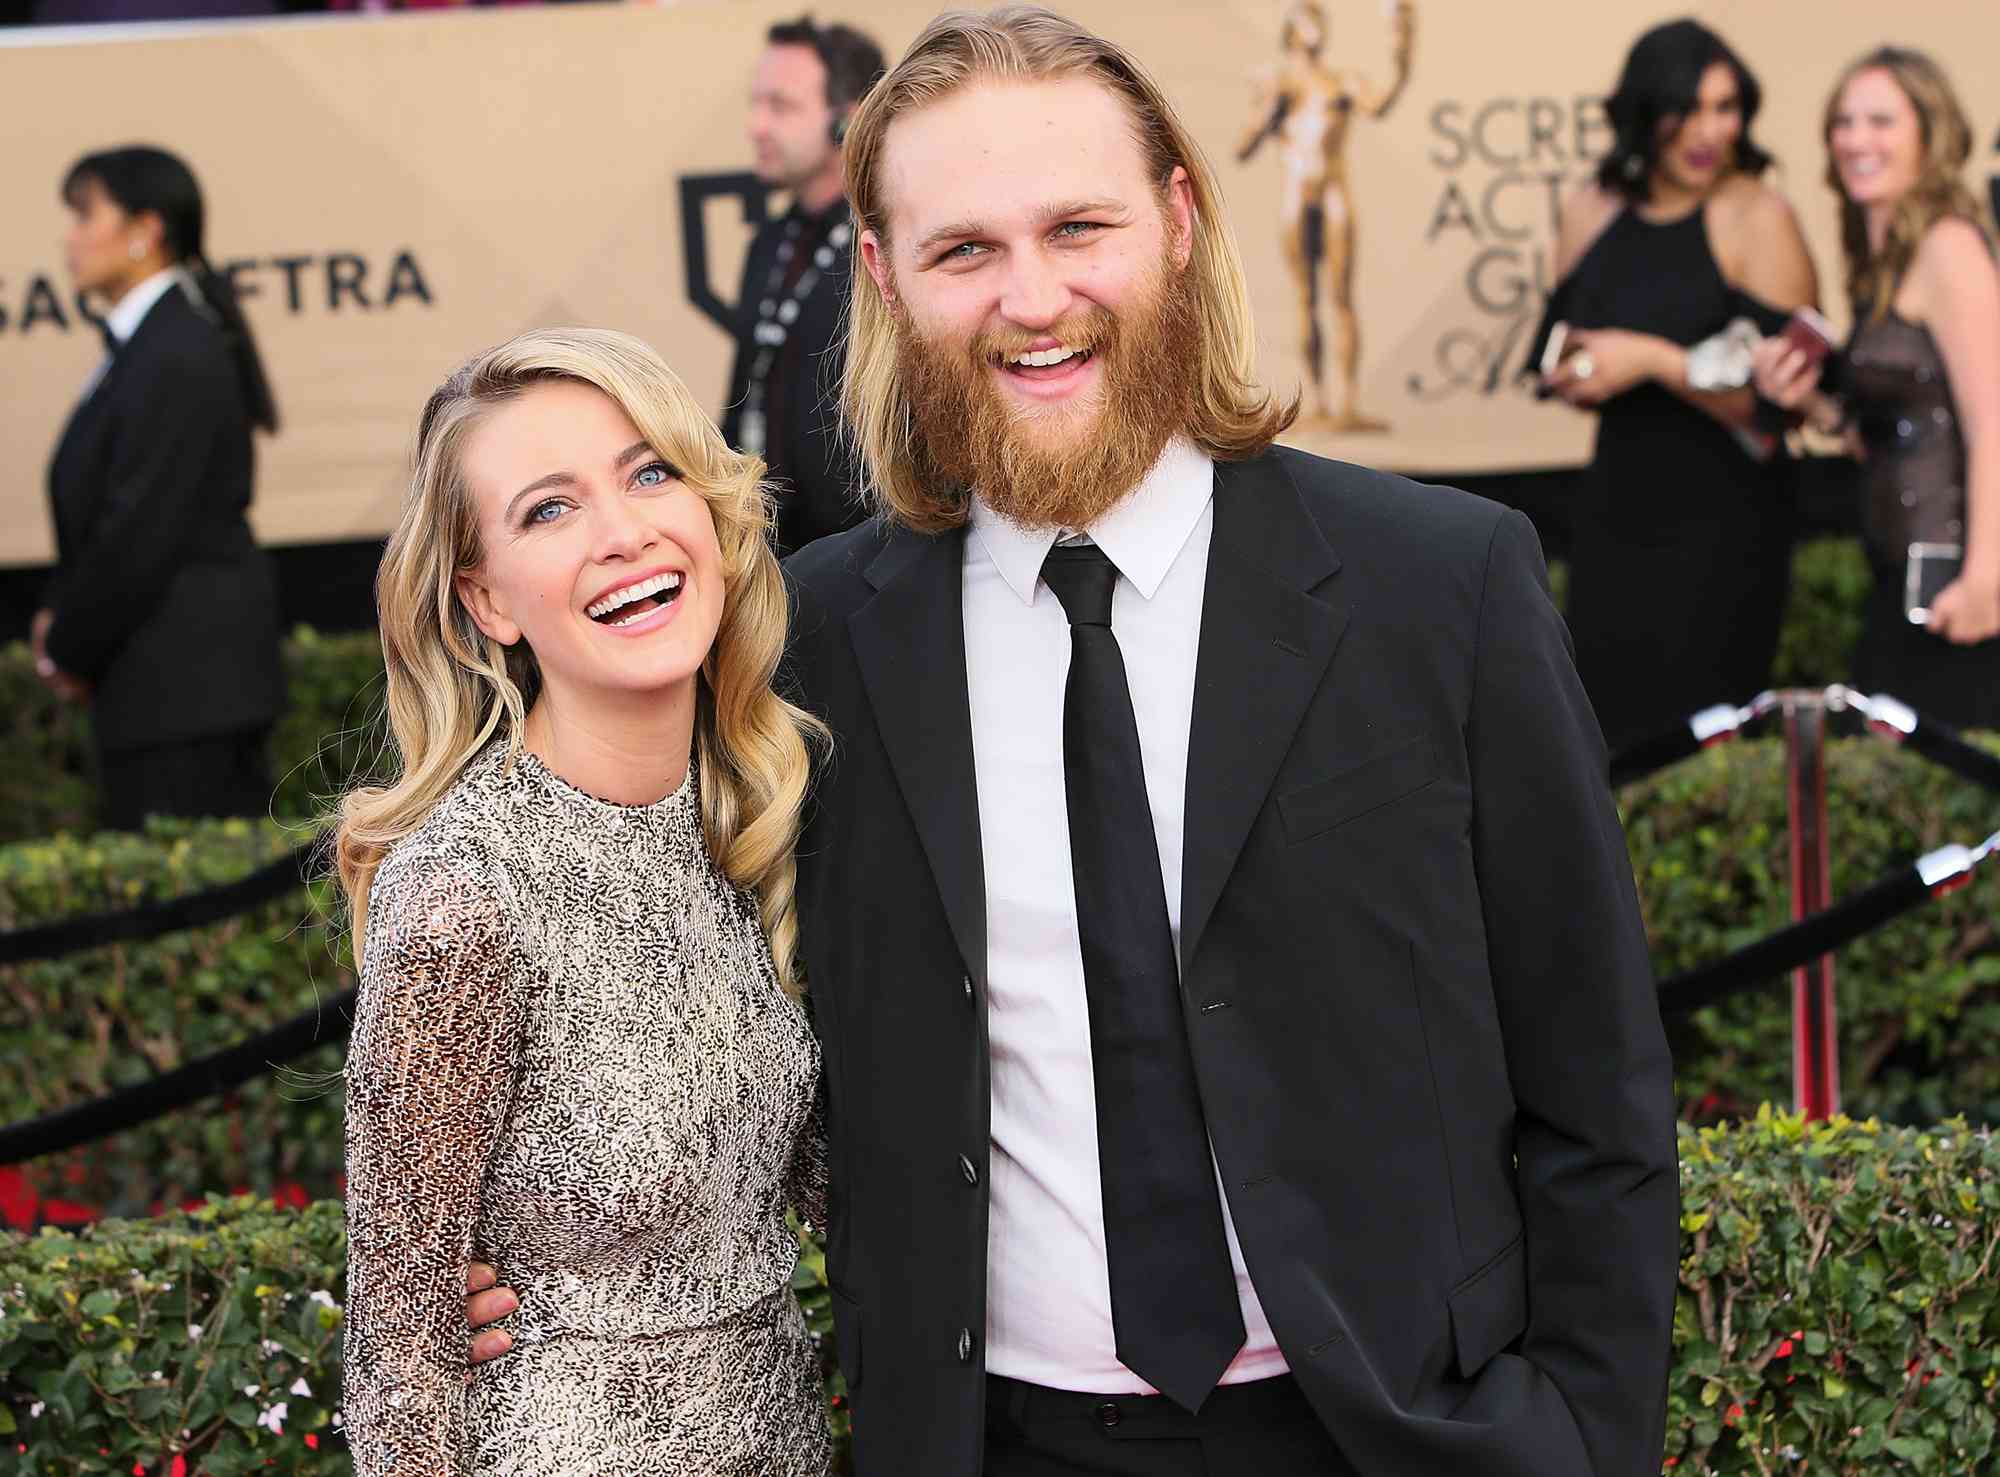 Meredith Hagner (L) and Wyatt Russell